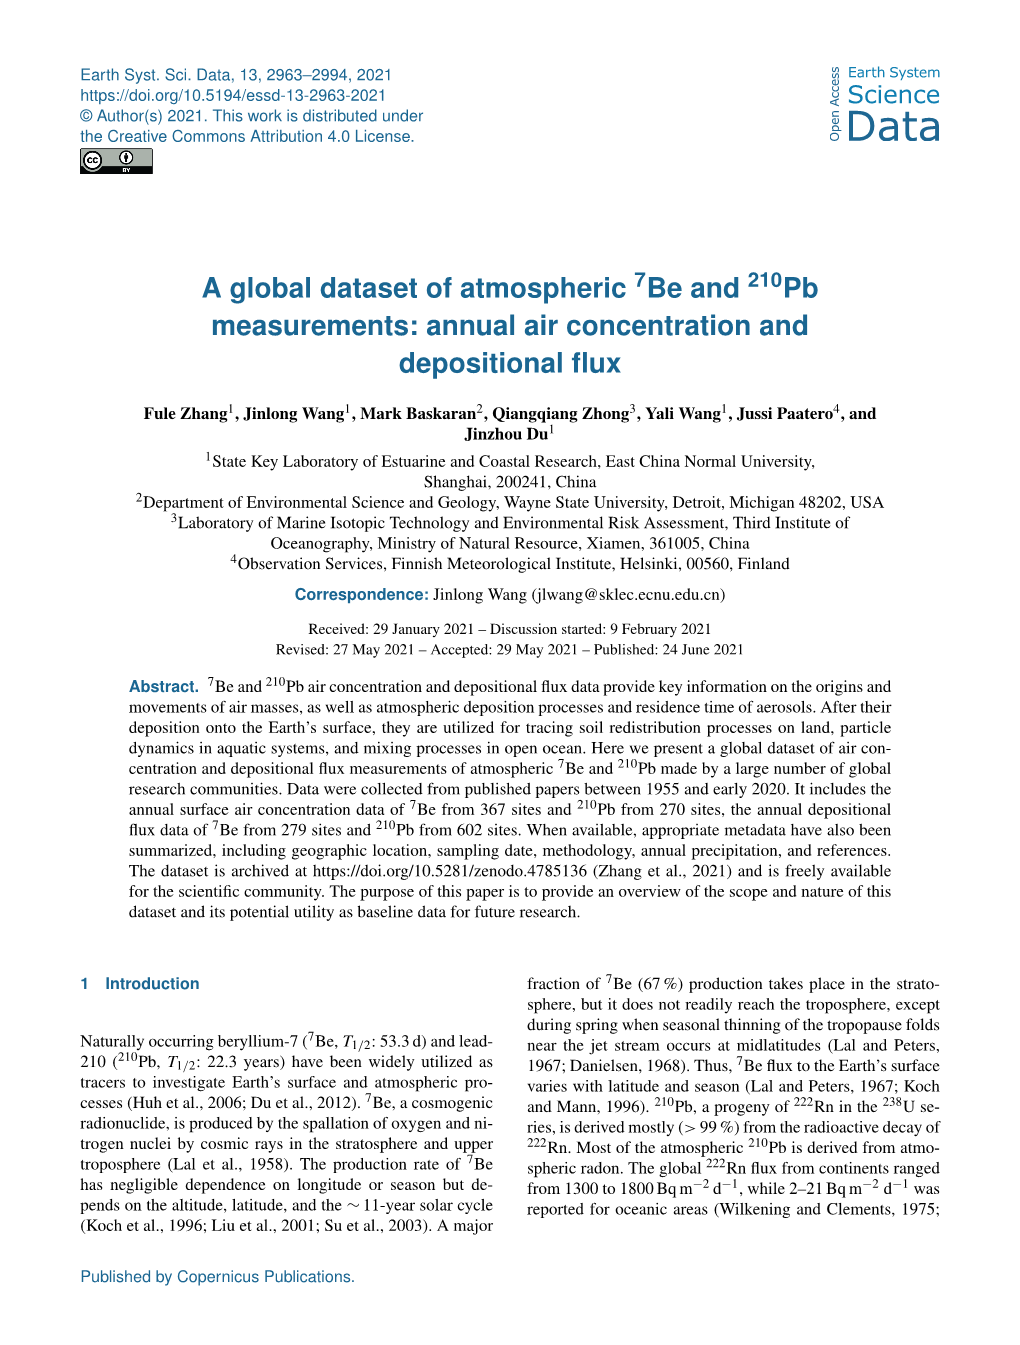 A Global Dataset of Atmospheric Be and Pb Measurements: Annual Air Concentration and Depositional Flux